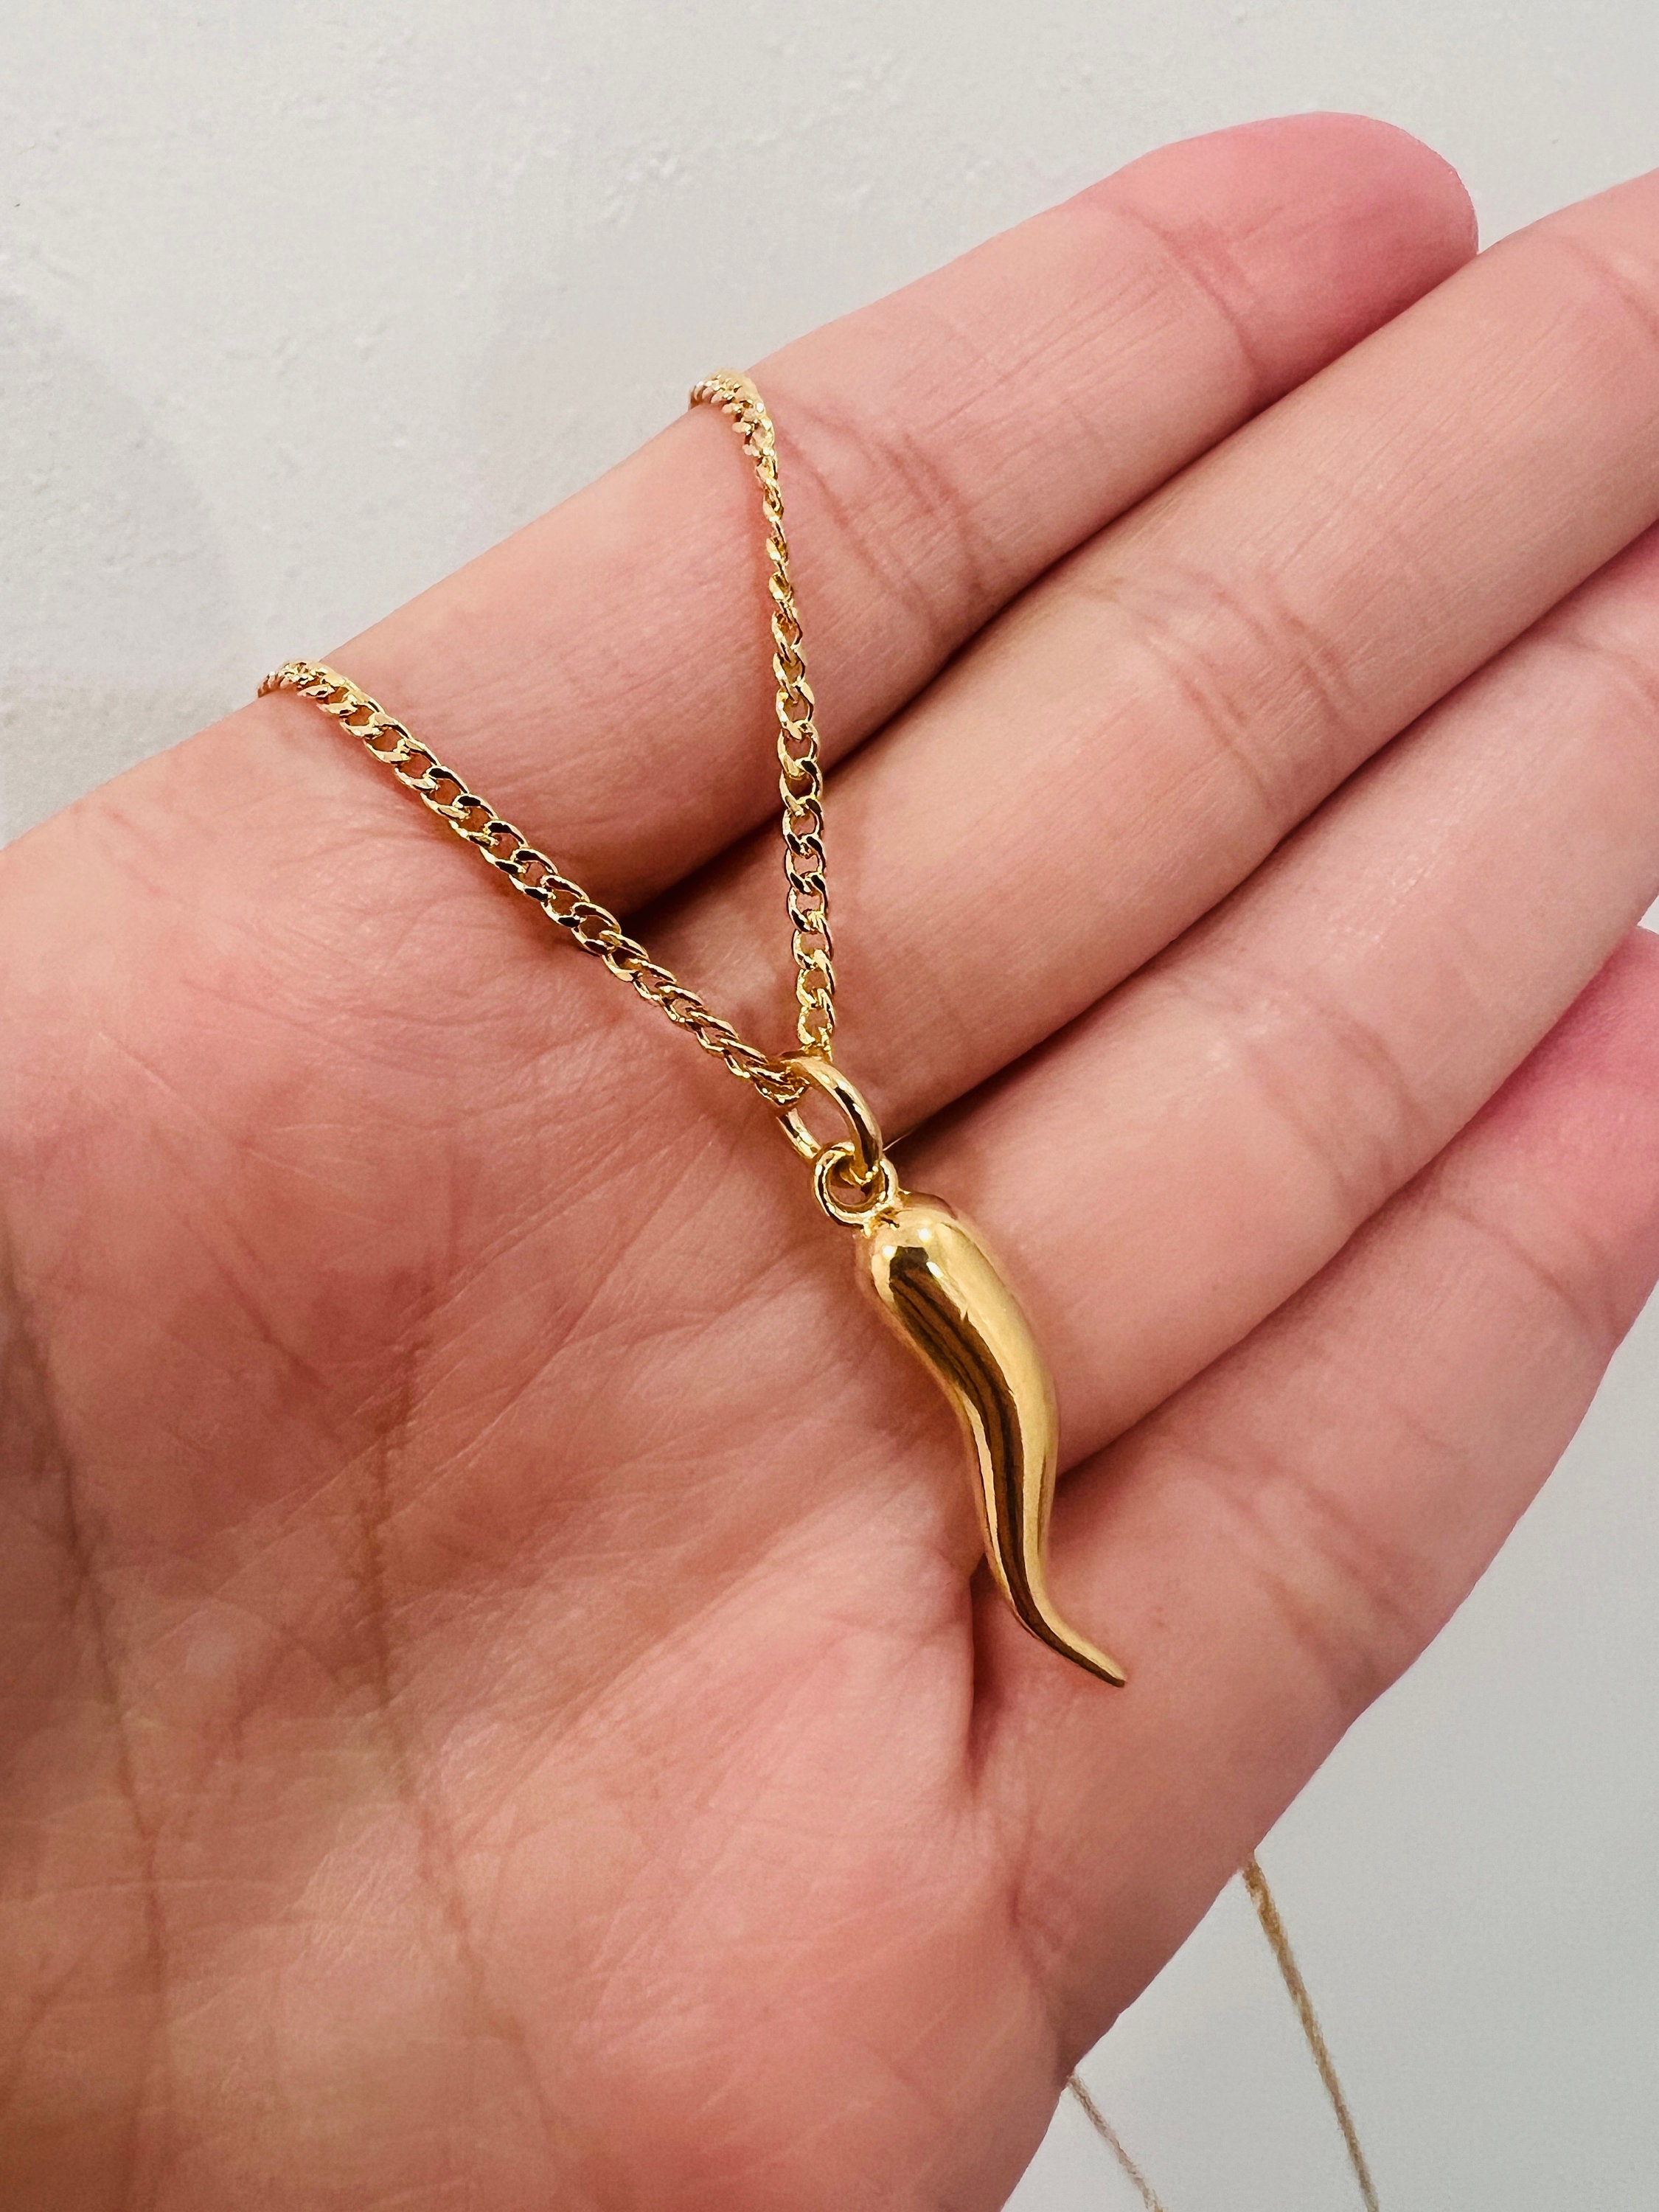 18K Gold Vermeil Style Necklace Chain, 925 Sterling Silver Necklace Chain  W/ Heavy 18K Gold Plated, Cable Chain, Rolo Chain, Bead Chain - Etsy